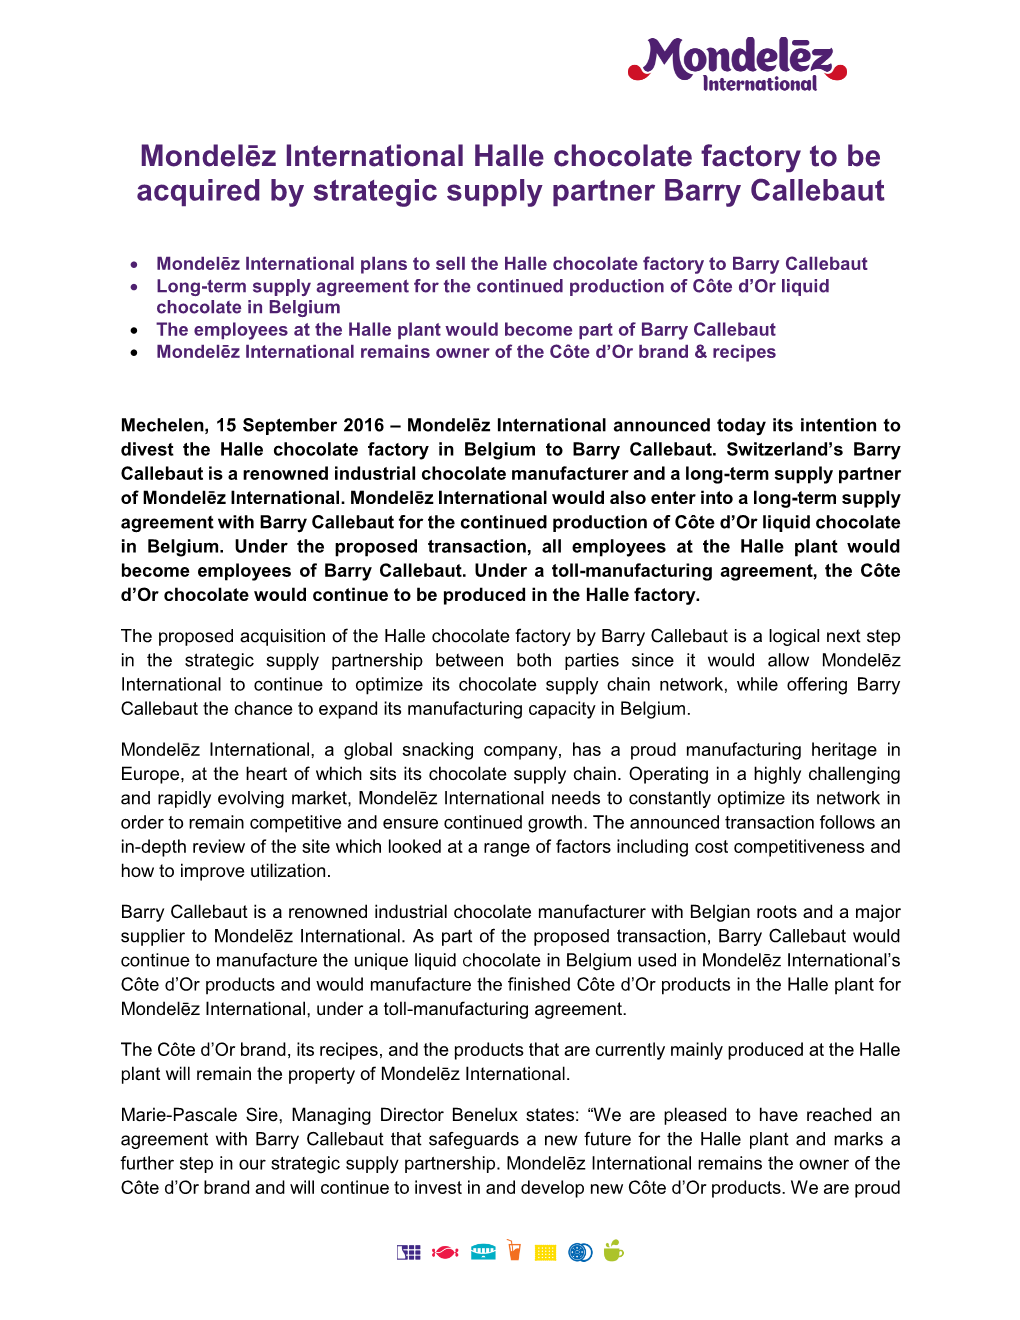 Mondelēz International Halle Chocolate Factory to Be Acquired by Strategic Supply Partner Barry Callebaut